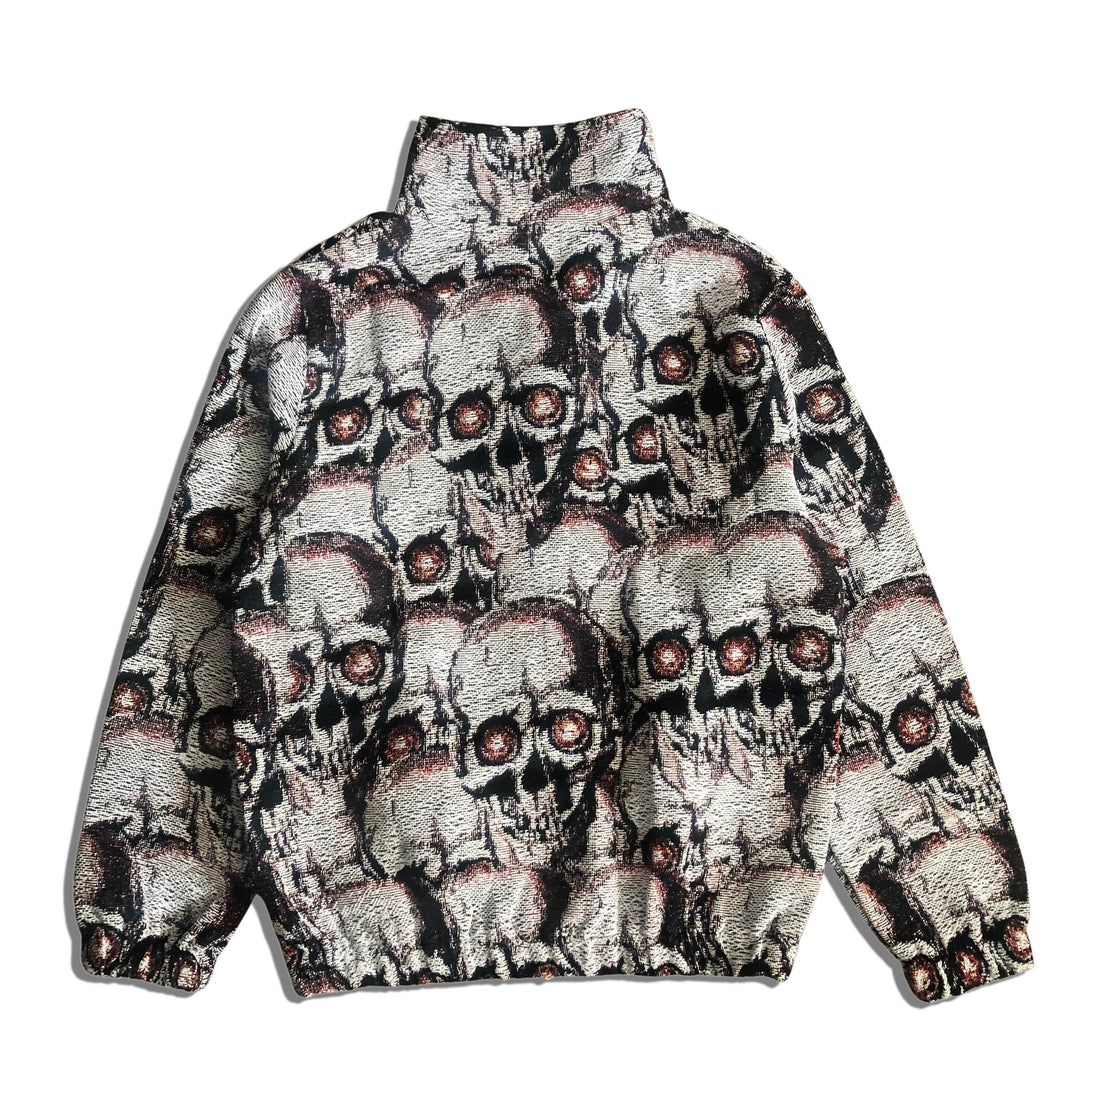 'Death Waits For No Man' Zip Up Sweater